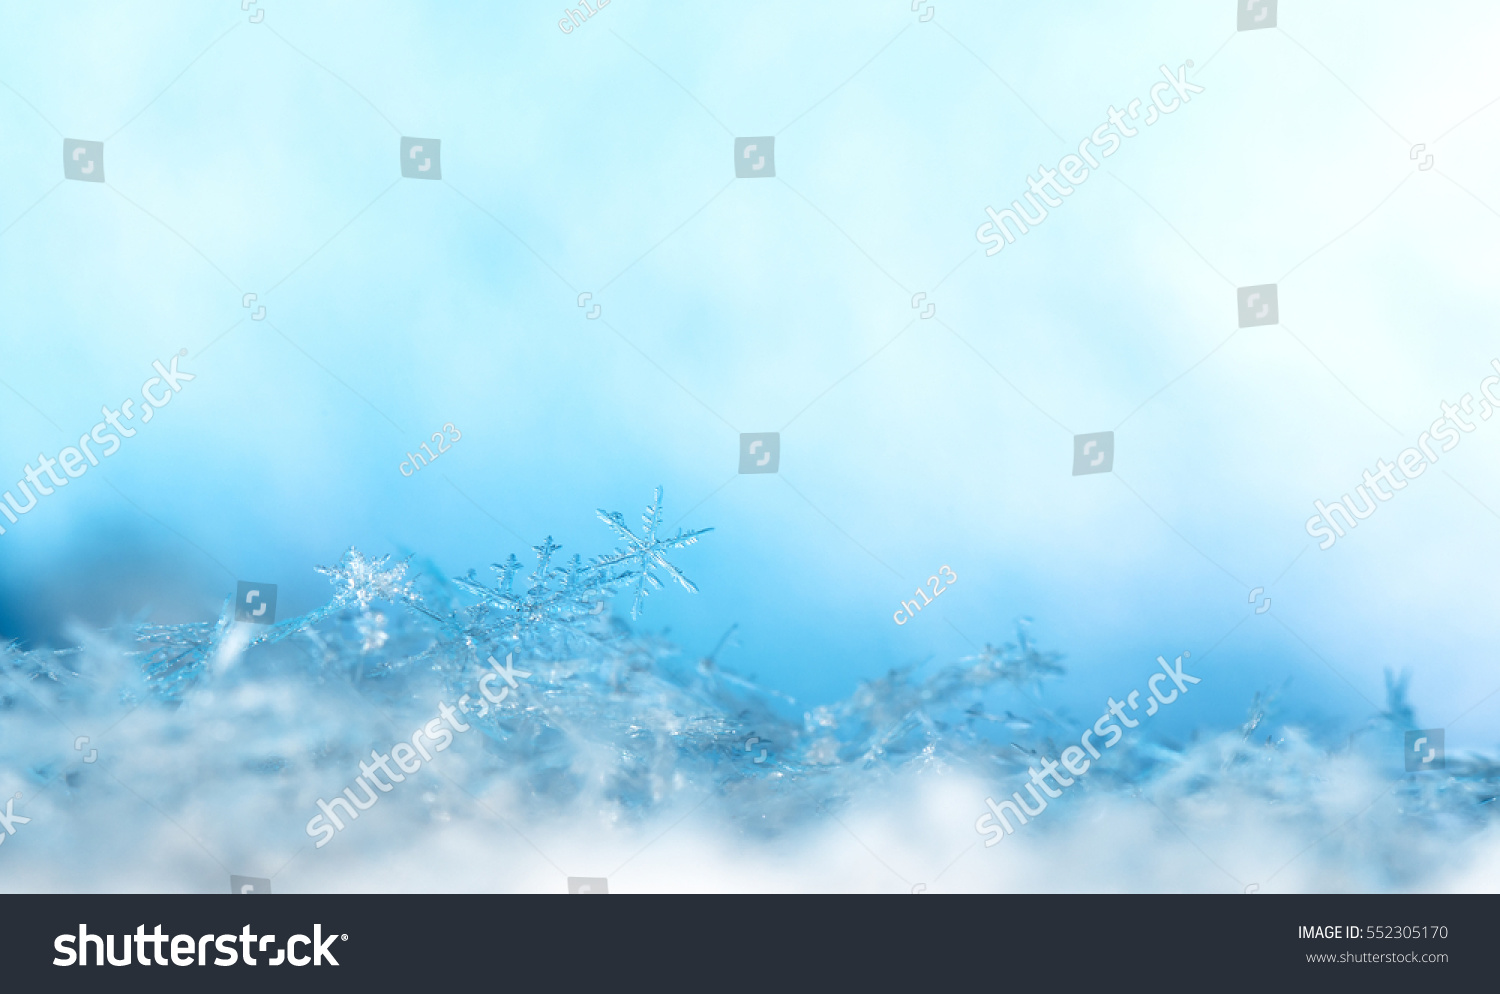 natural snowflakes on snow, photo real snowflakes during a snowfall, under natural conditions at low temperature #552305170